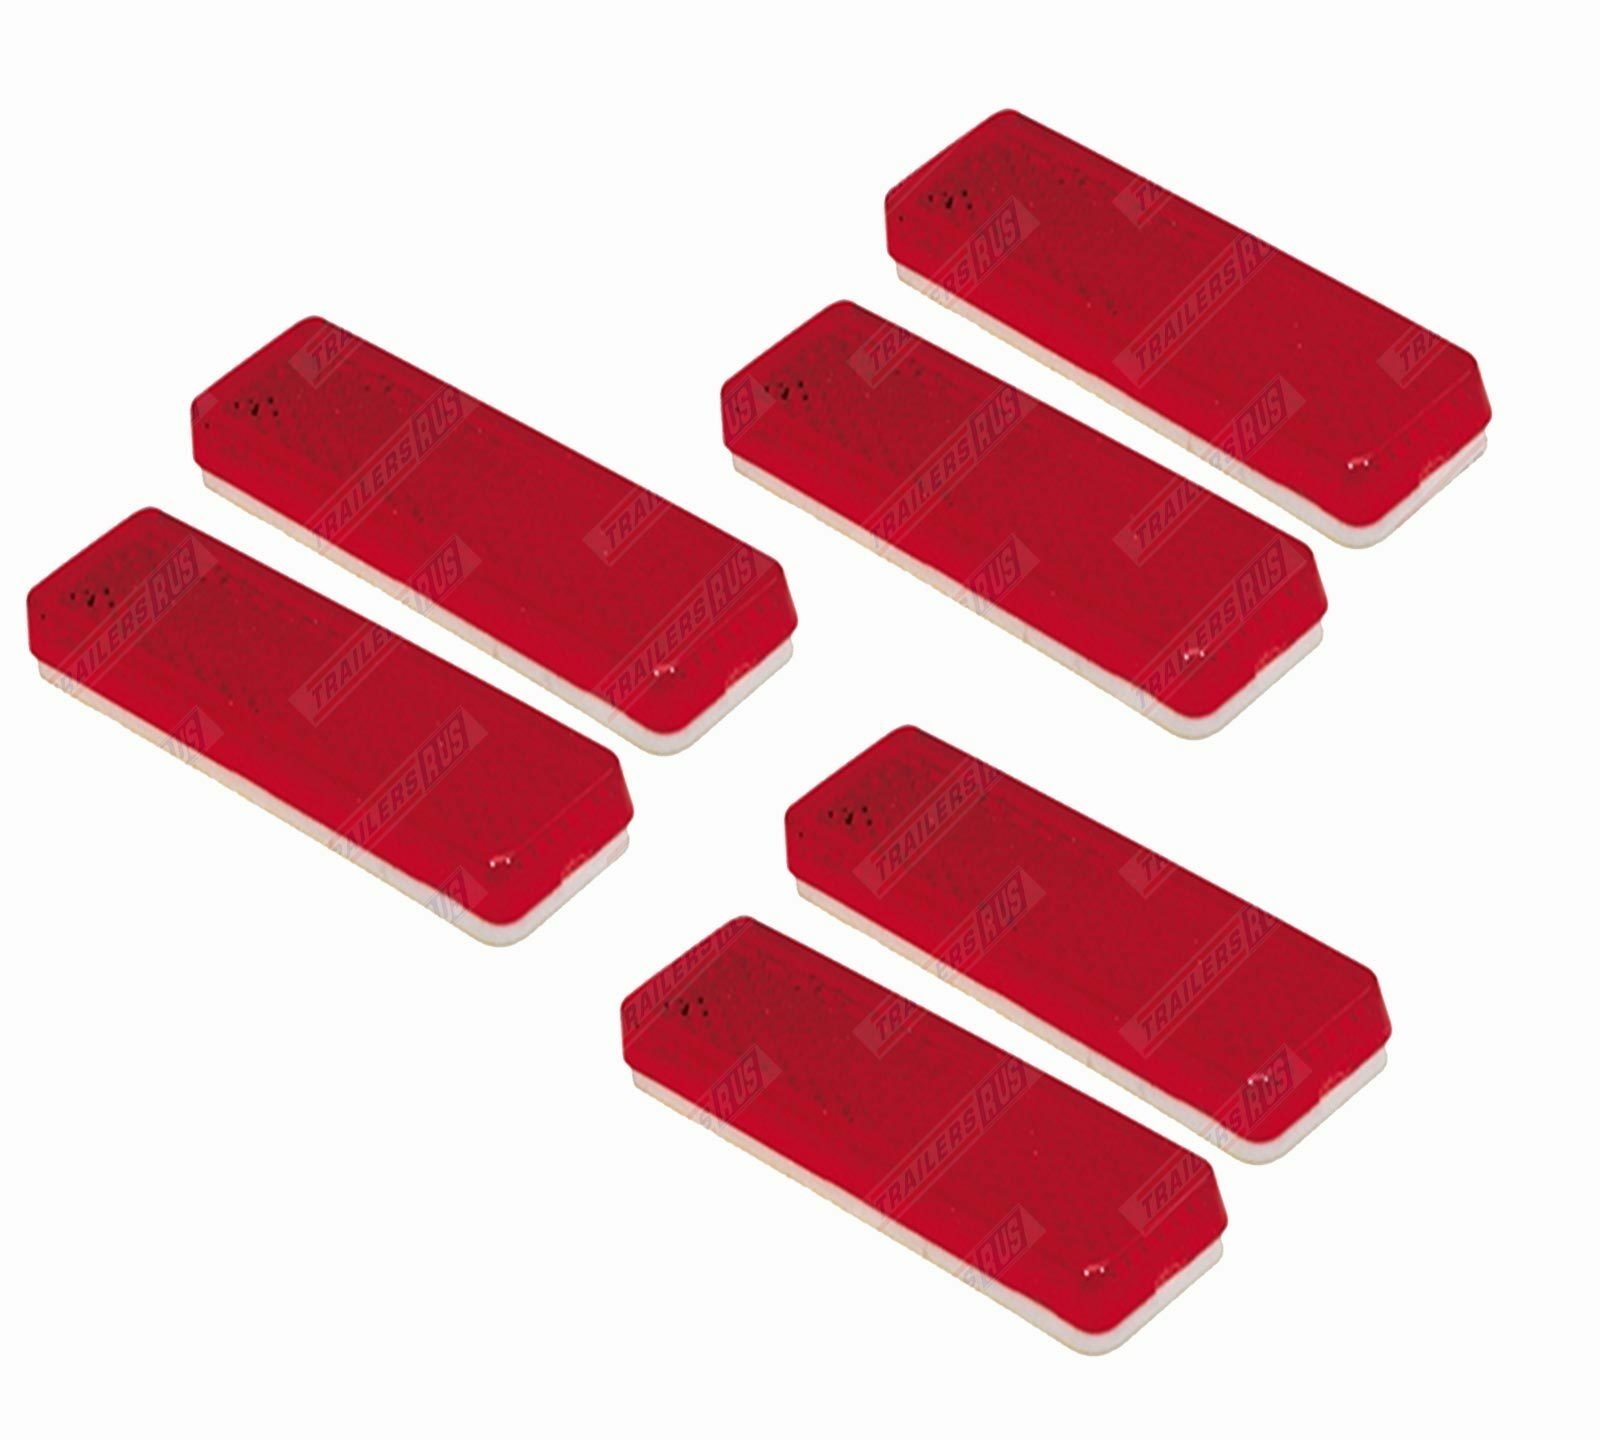 REAR RED ROUND STICK ON SELF ADHESIVE REFLECTOR 60mm CAR